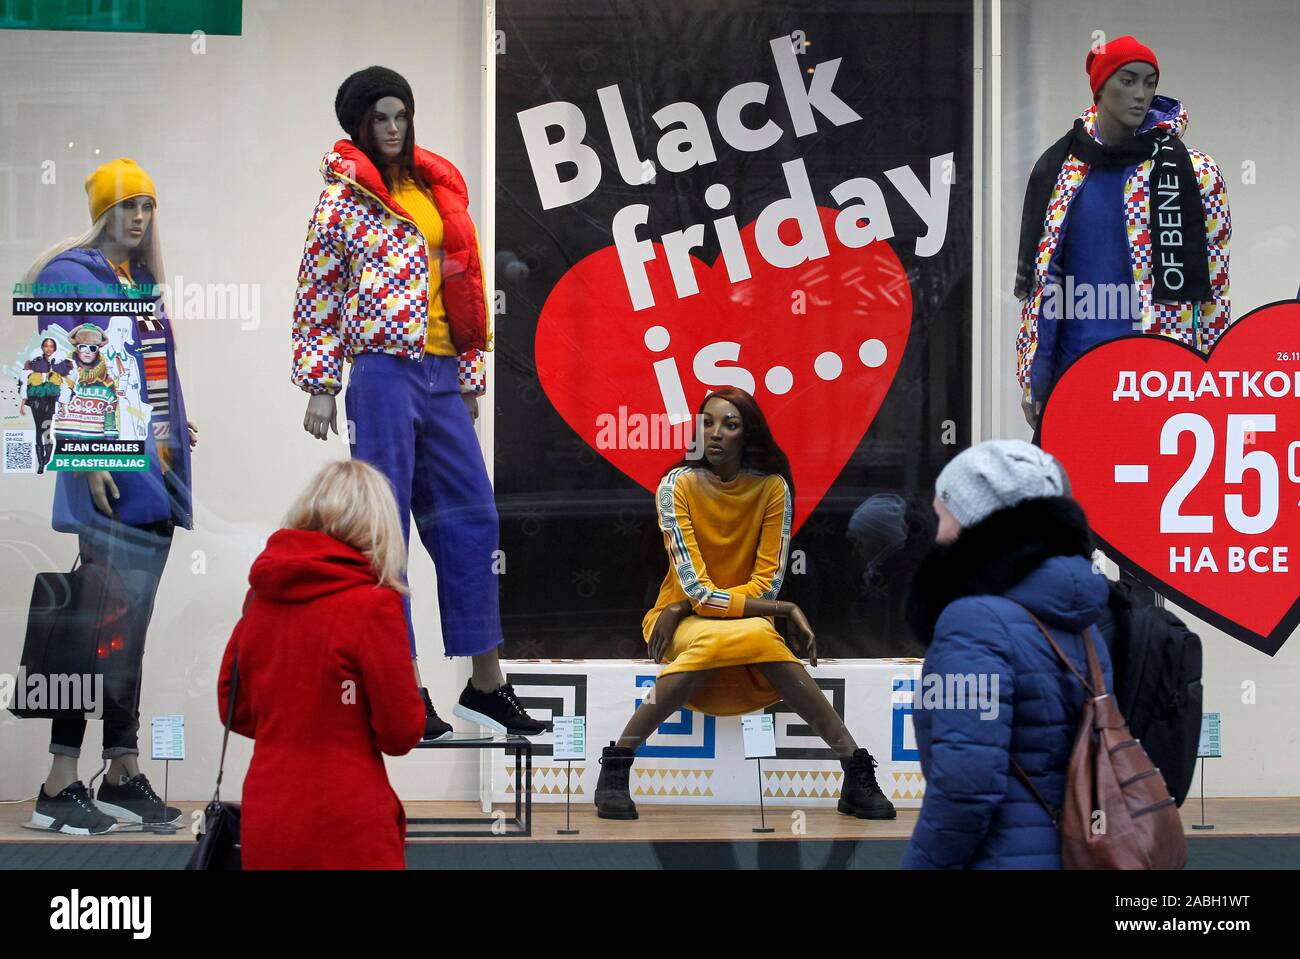 People look at a board with Black Friday sales discounts, outside a store. Black Friday is an informal name for the Friday following Thanksgiving Day in the United States which is celebrated on the fourth Thursday of November. The Black Friday is a sales offer to attract shoppers for the Christmas shopping season. Stock Photo